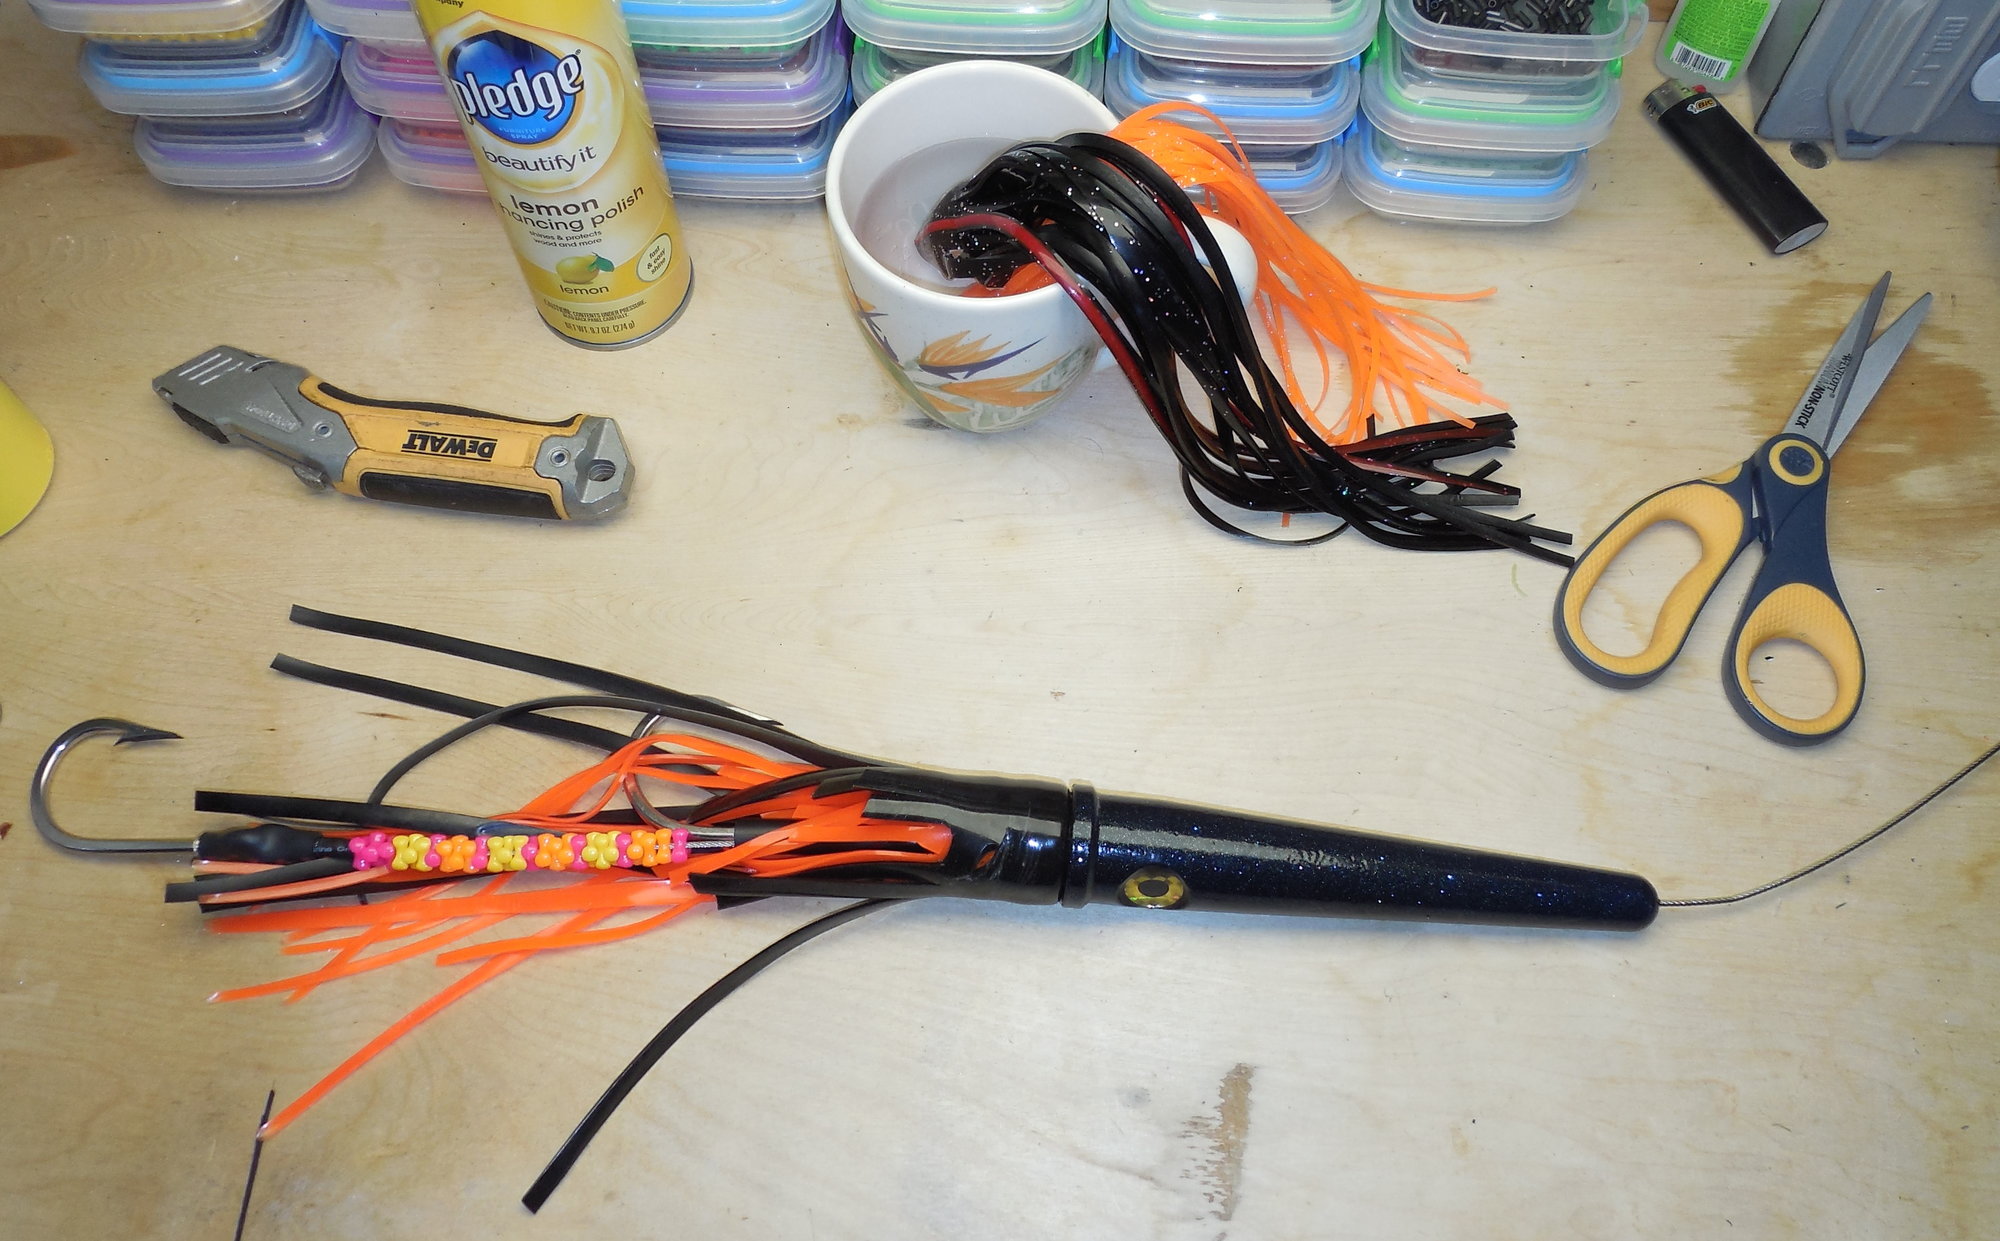 Fishing pliars, what are you using? - The Hull Truth - Boating and Fishing  Forum